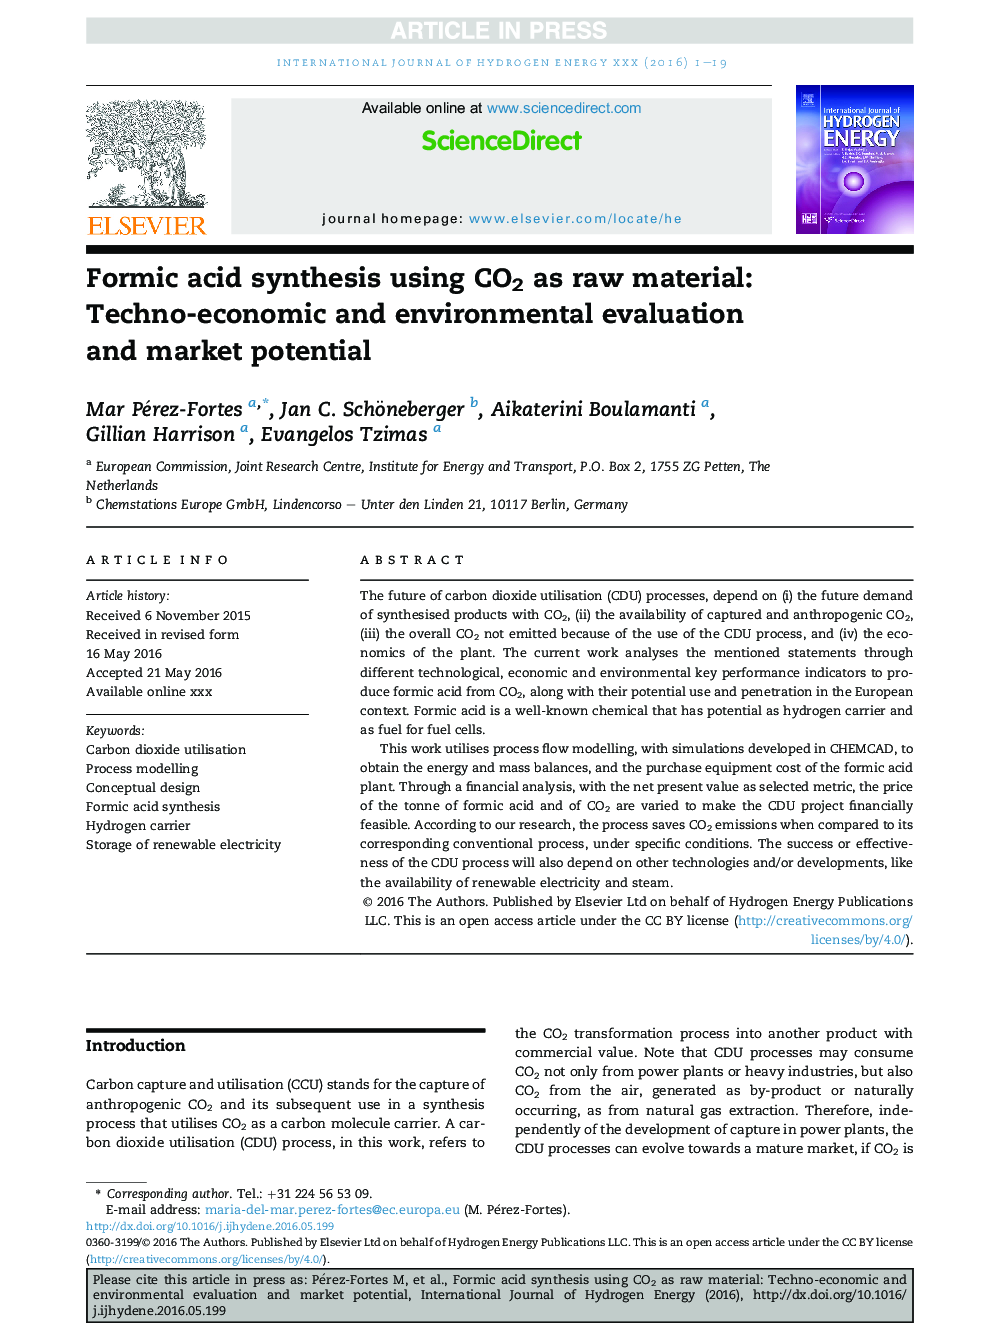 Formic acid synthesis using CO2 as raw material: Techno-economic and environmental evaluation and market potential